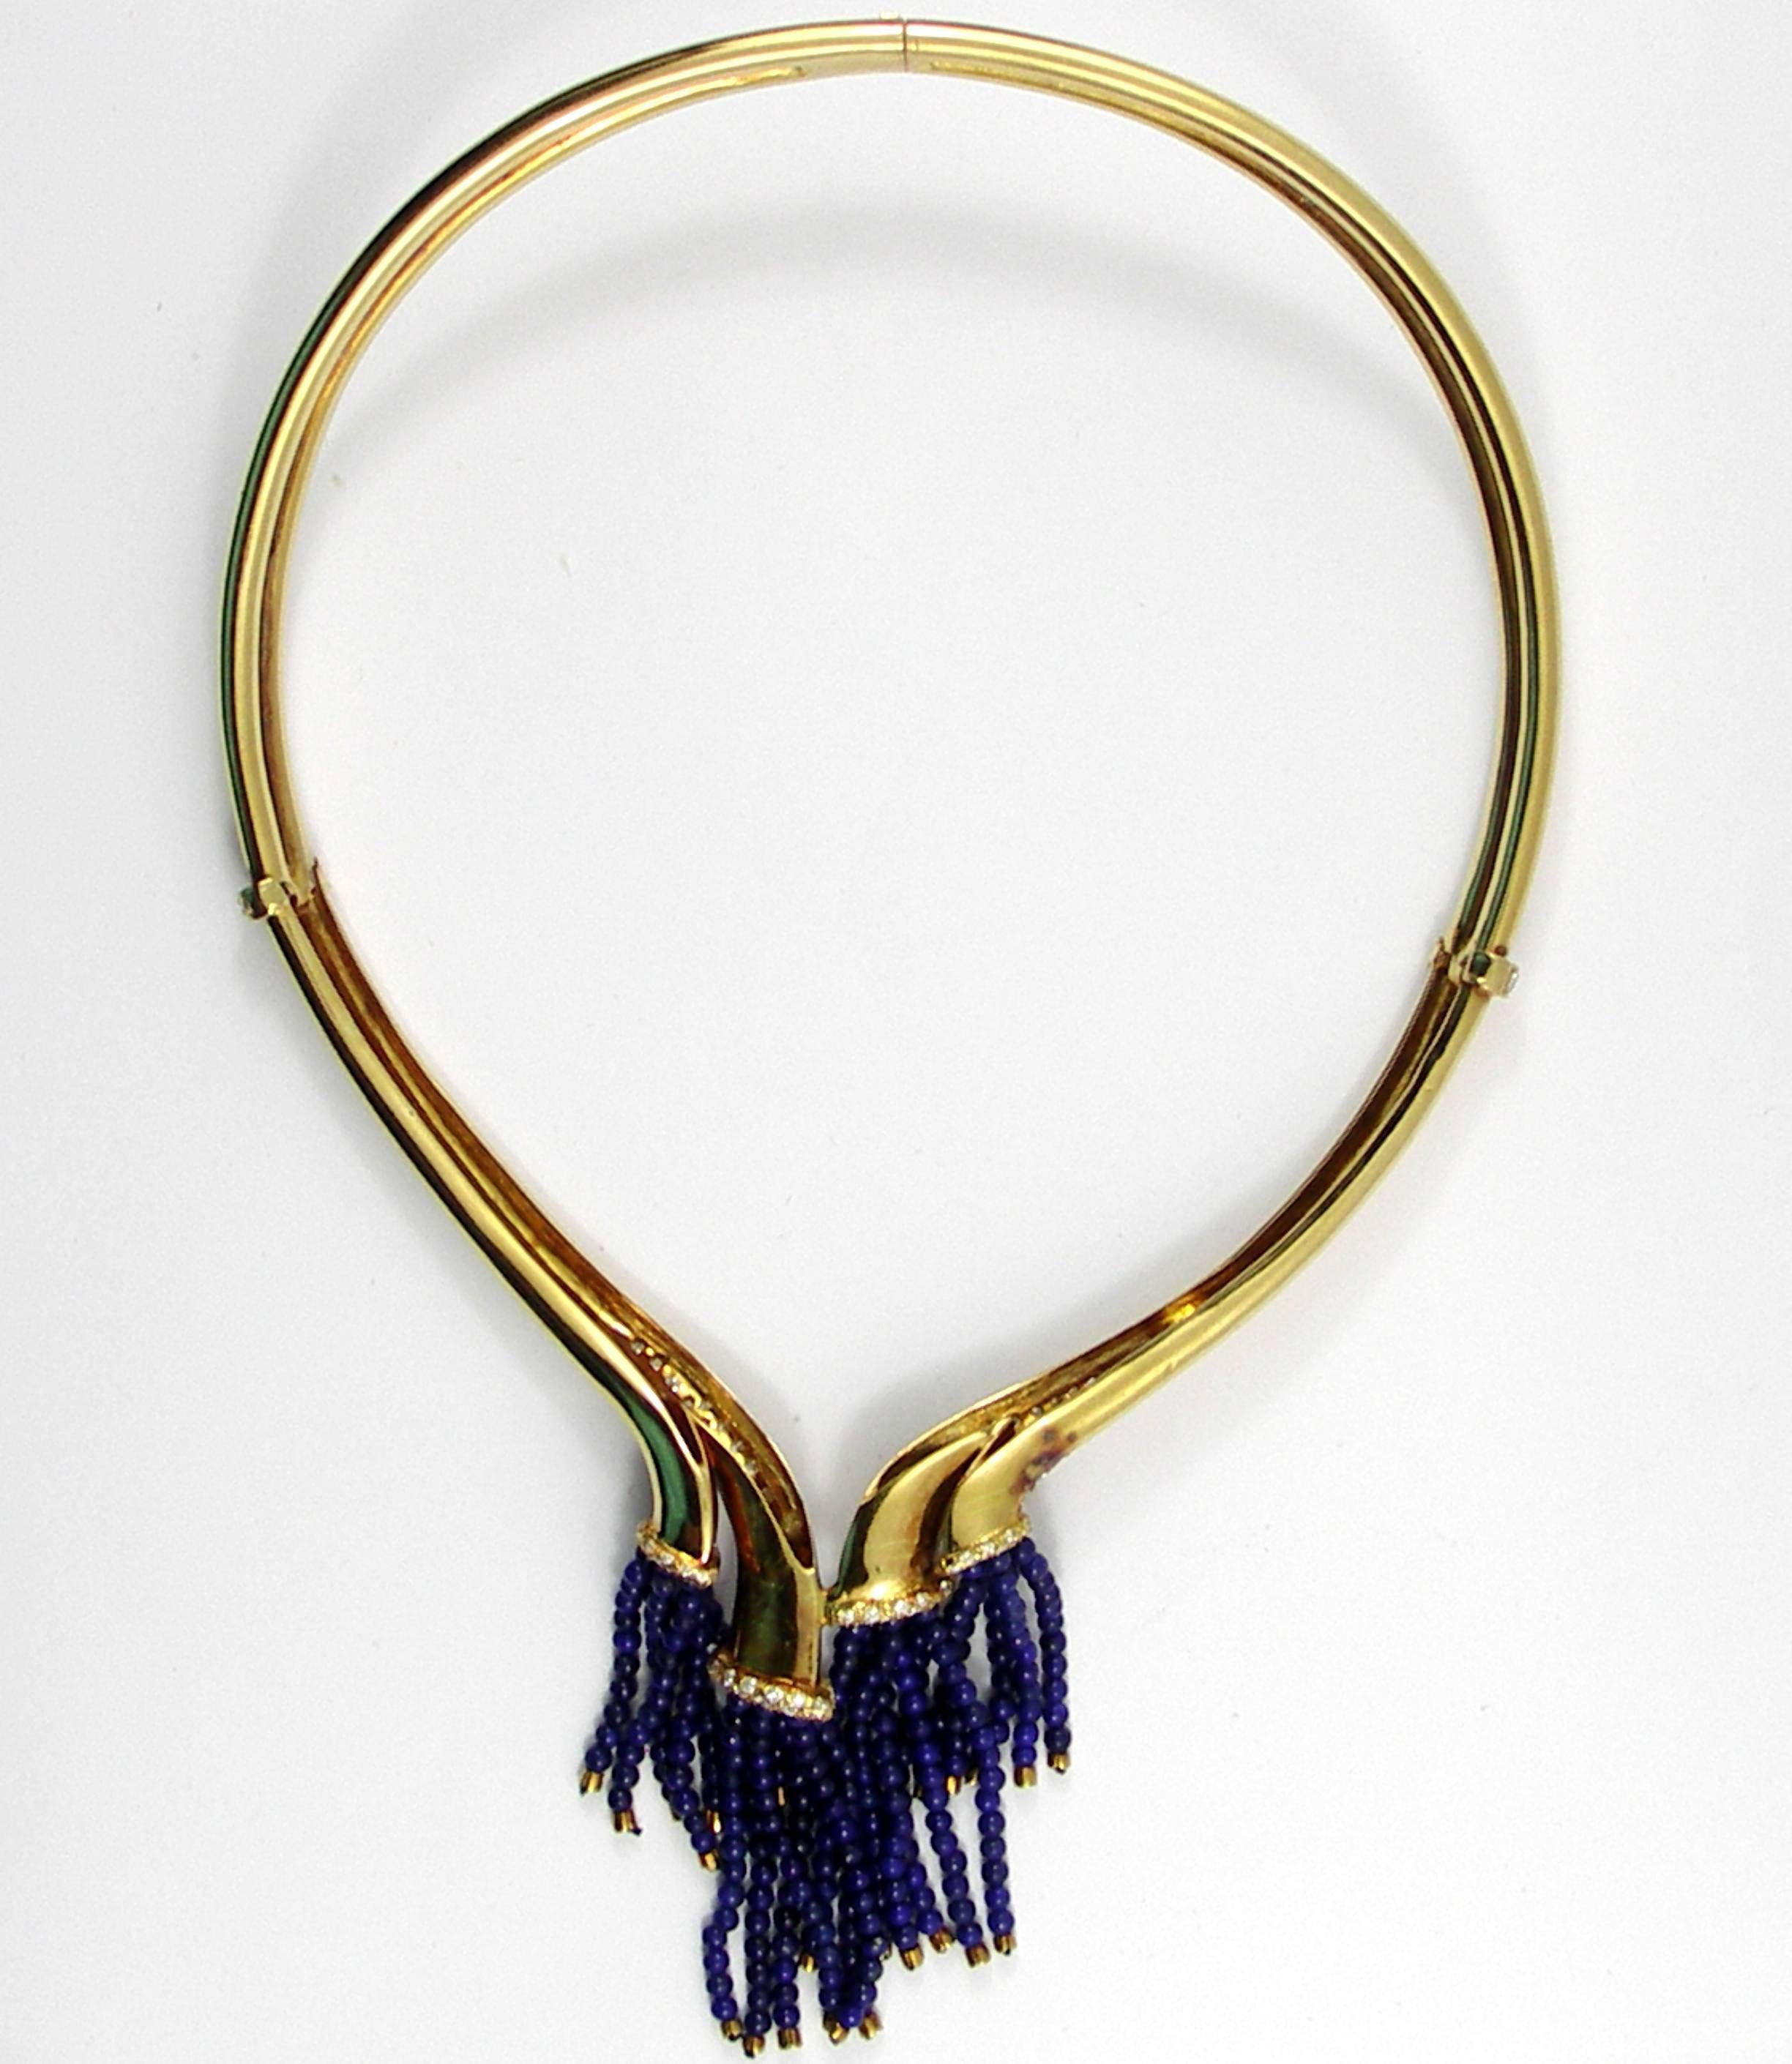 Gold Necklace with Diamonds and Lapis Bead Tassels 1